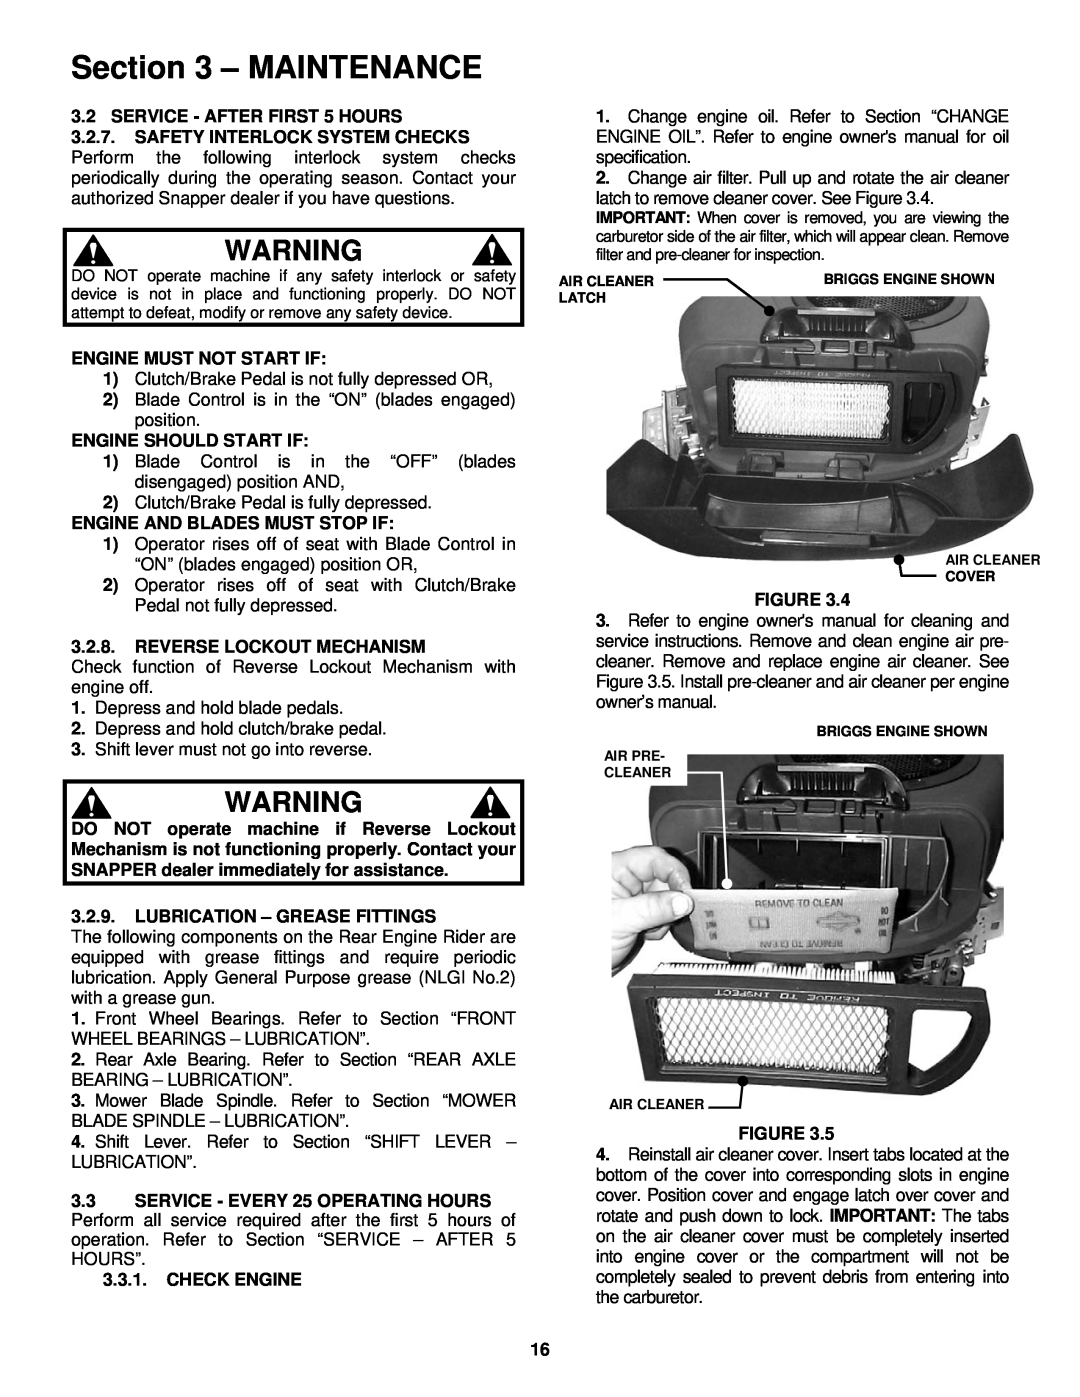 Snapper important safety instructions Maintenance, Clutch/Brake Pedal is not fully depressed OR 